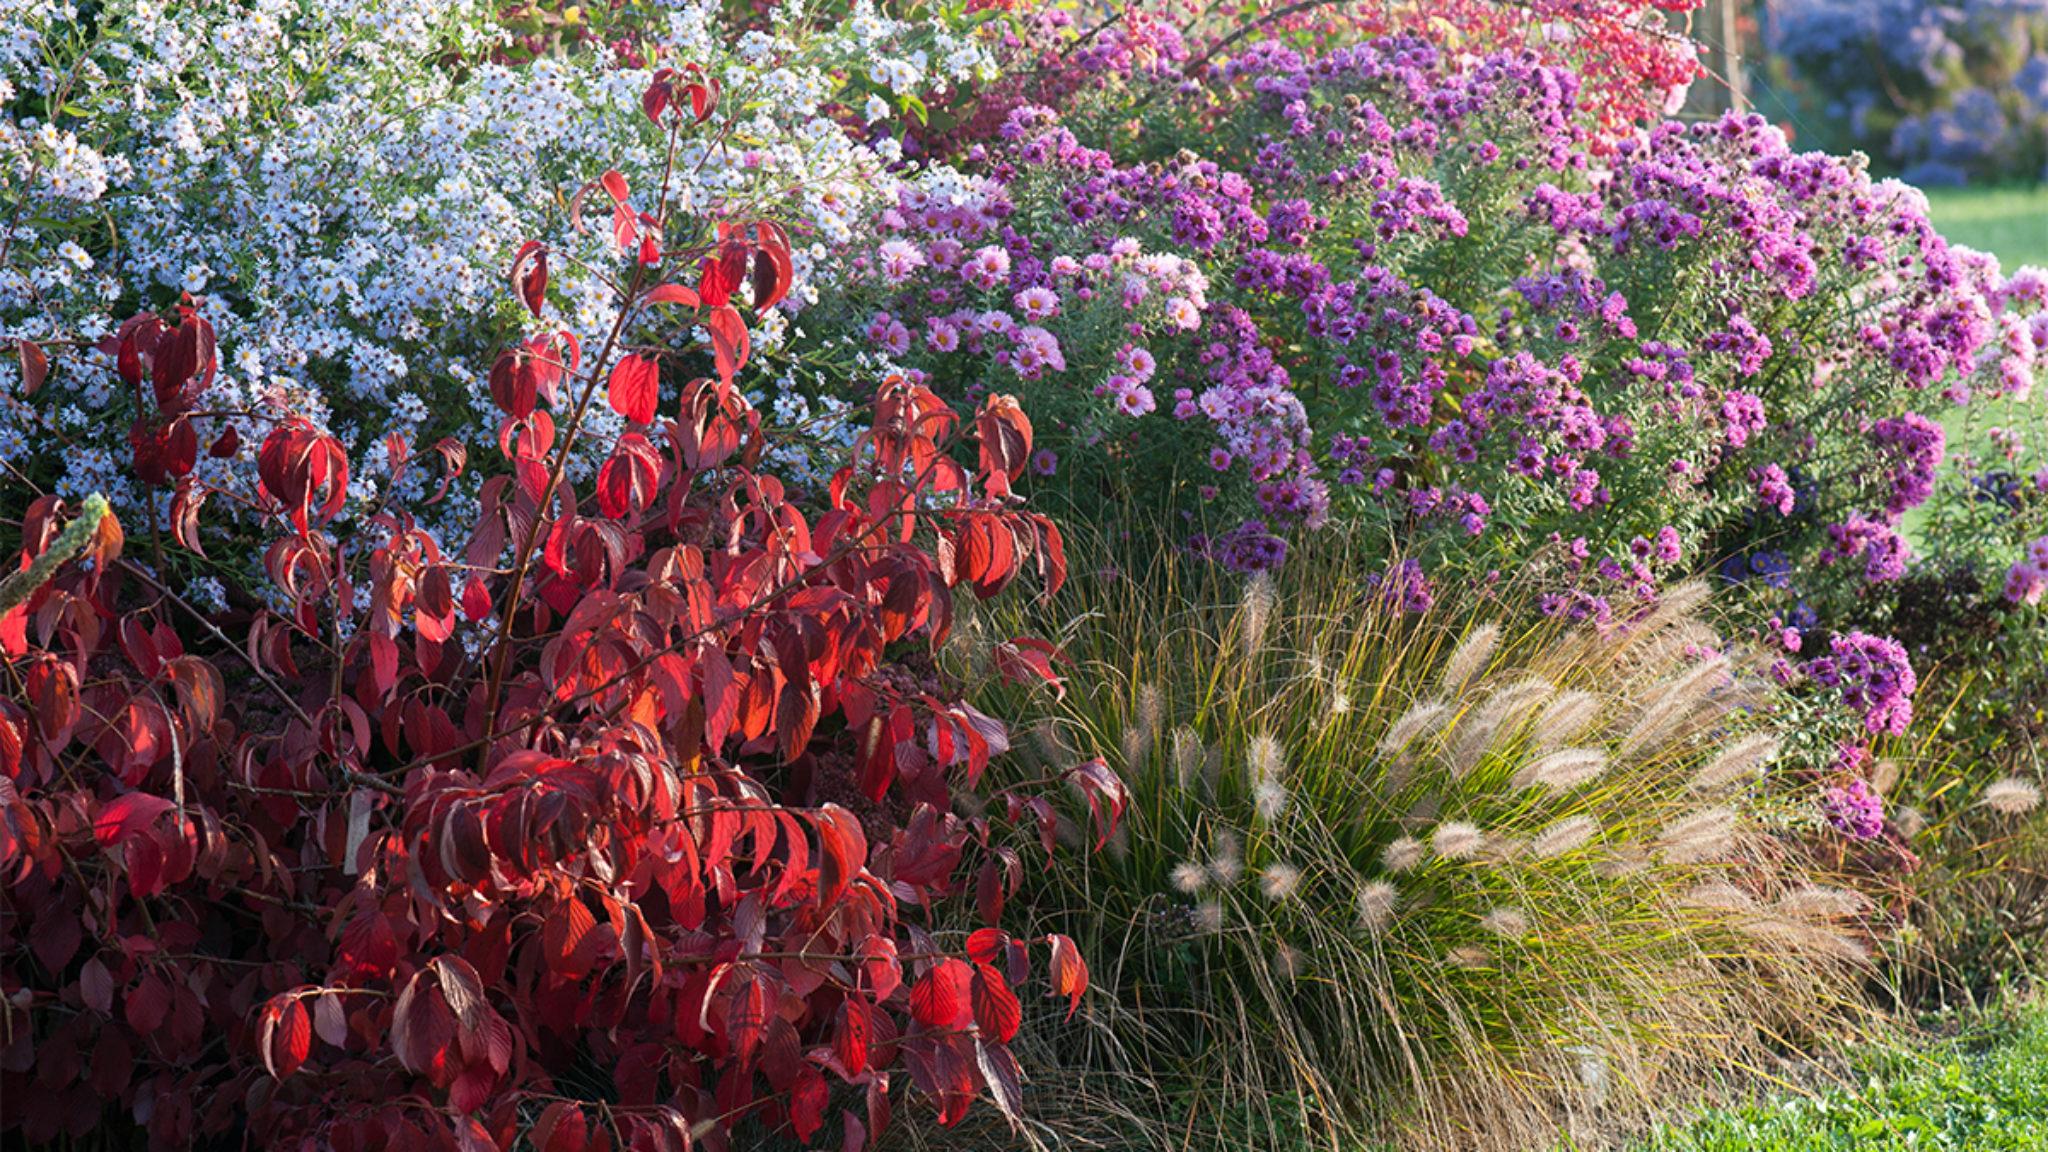 Combination of different plants such as asters, grasses, burning bush, and a few berrying plants in the Fall time.